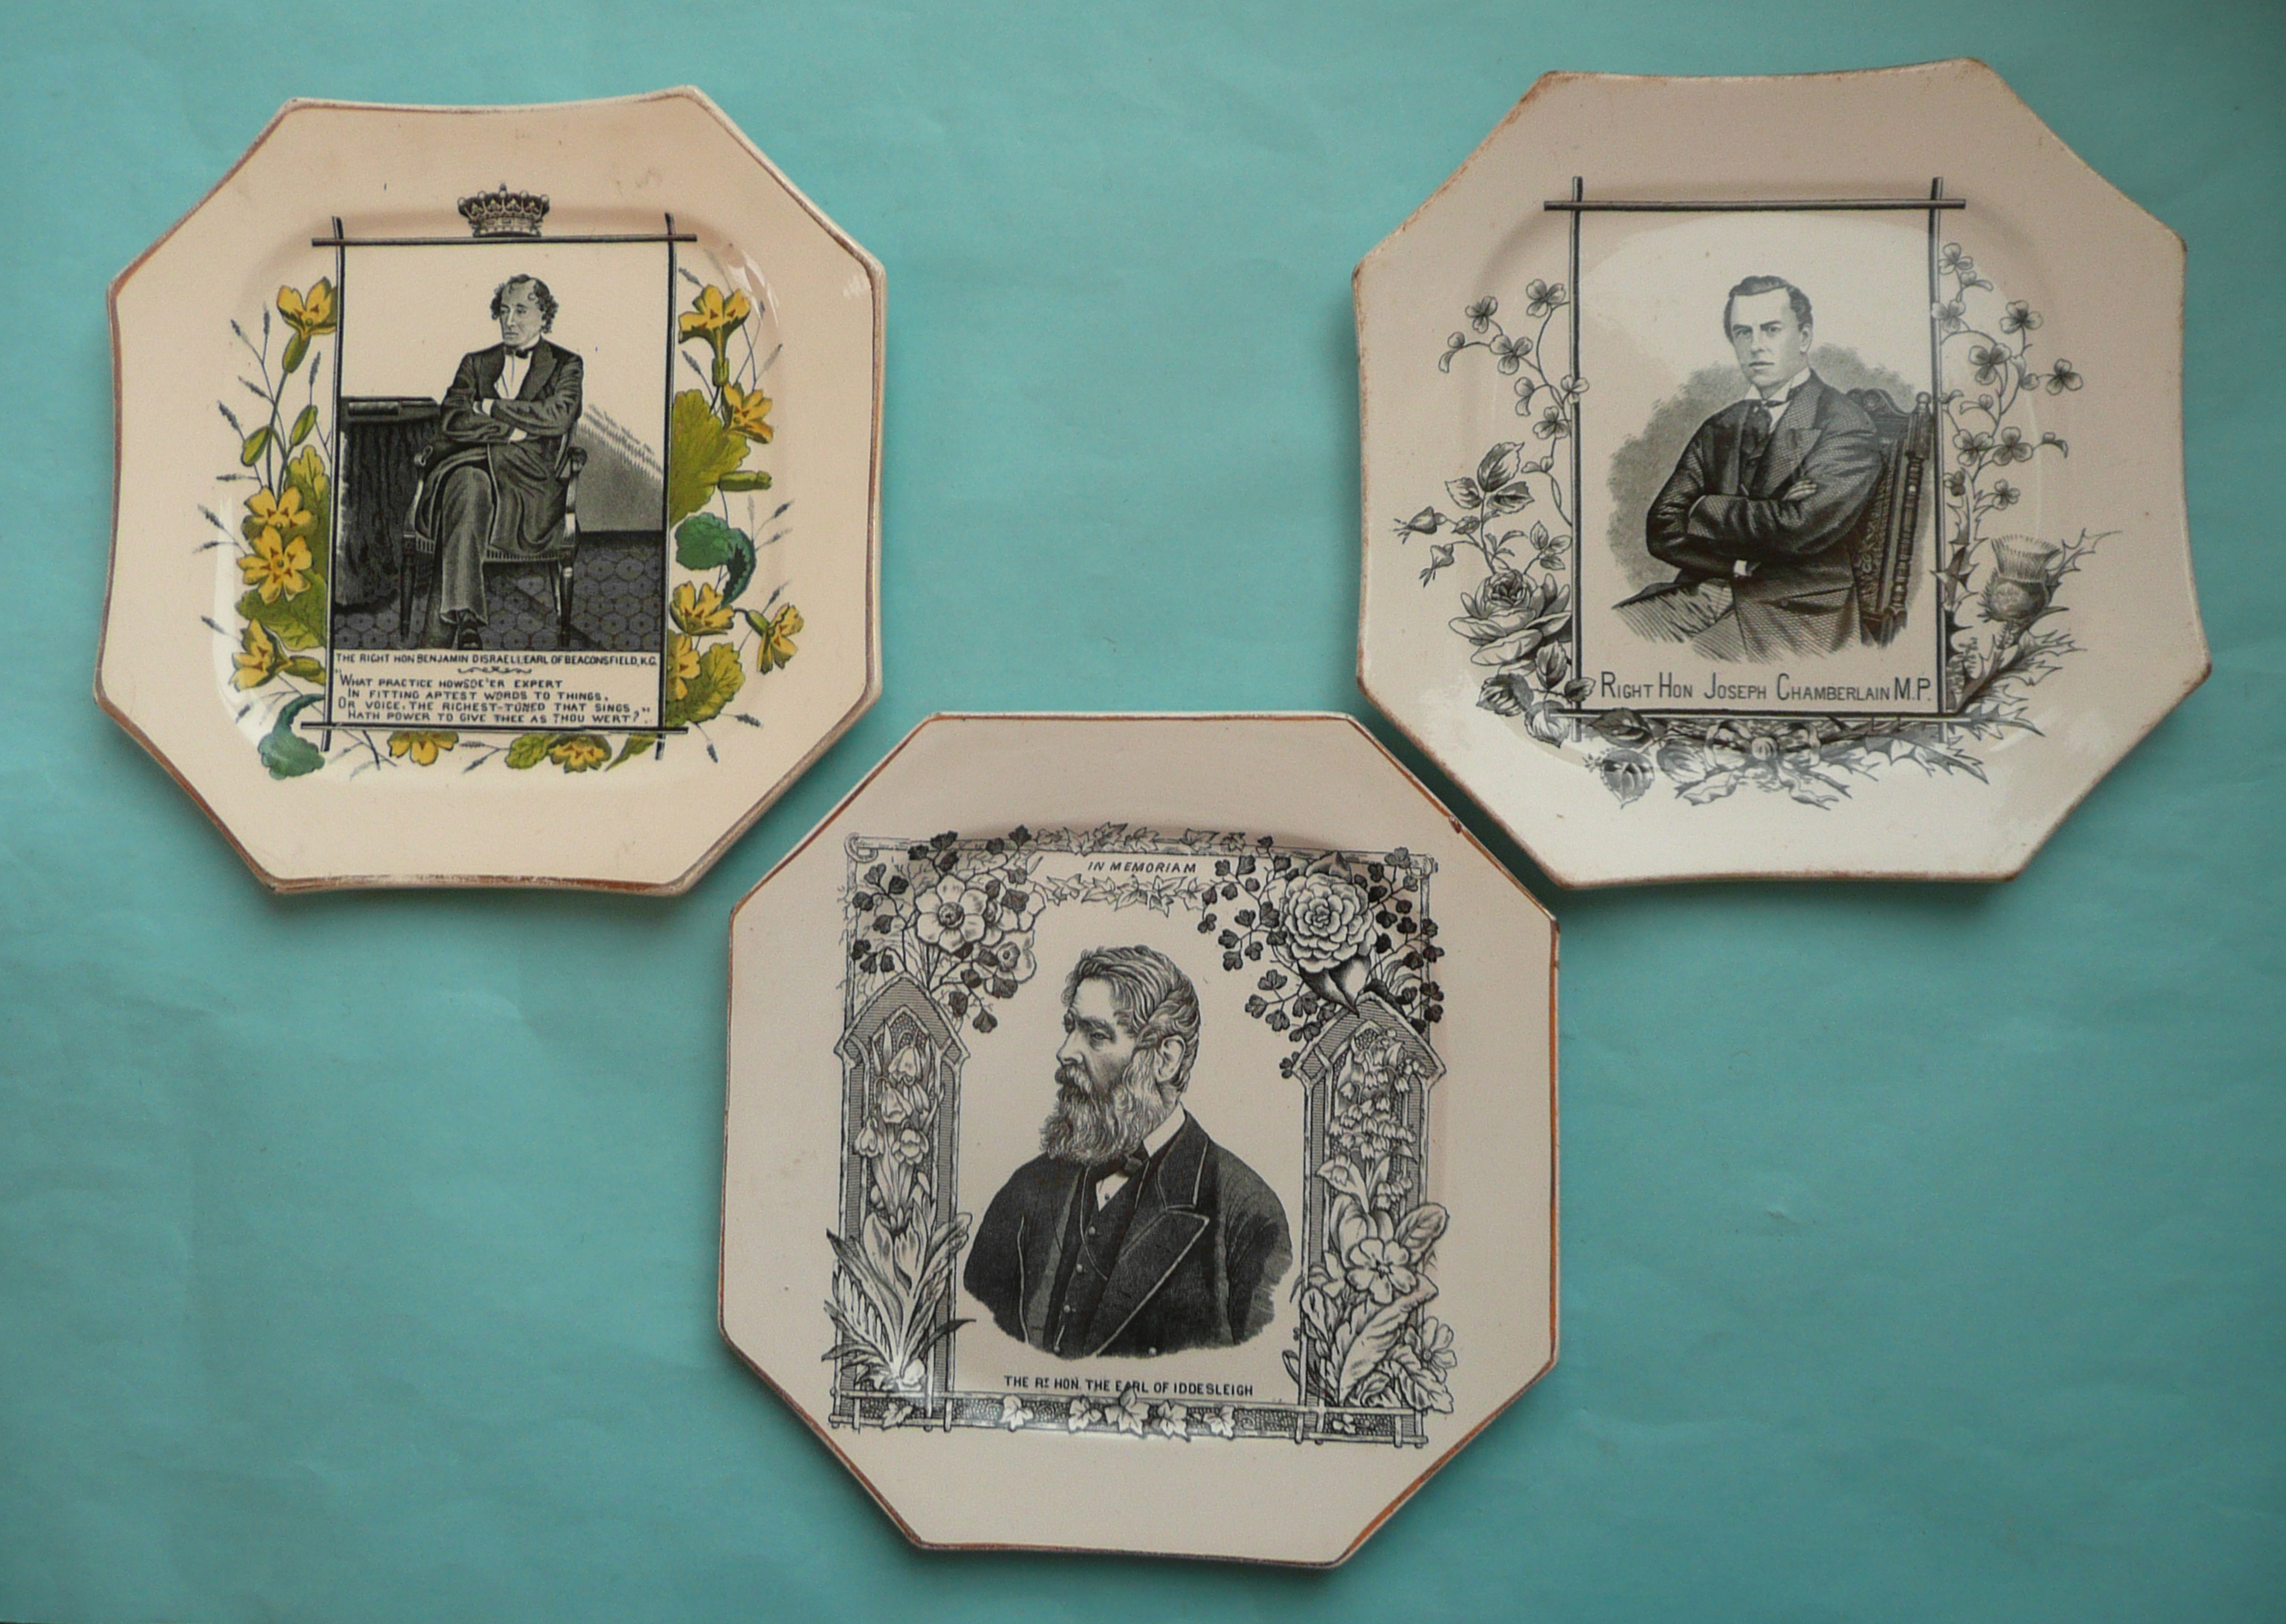 An octagonal plate depicting Disraeli, another Chamberlain and one other Iddseleigh (3) (